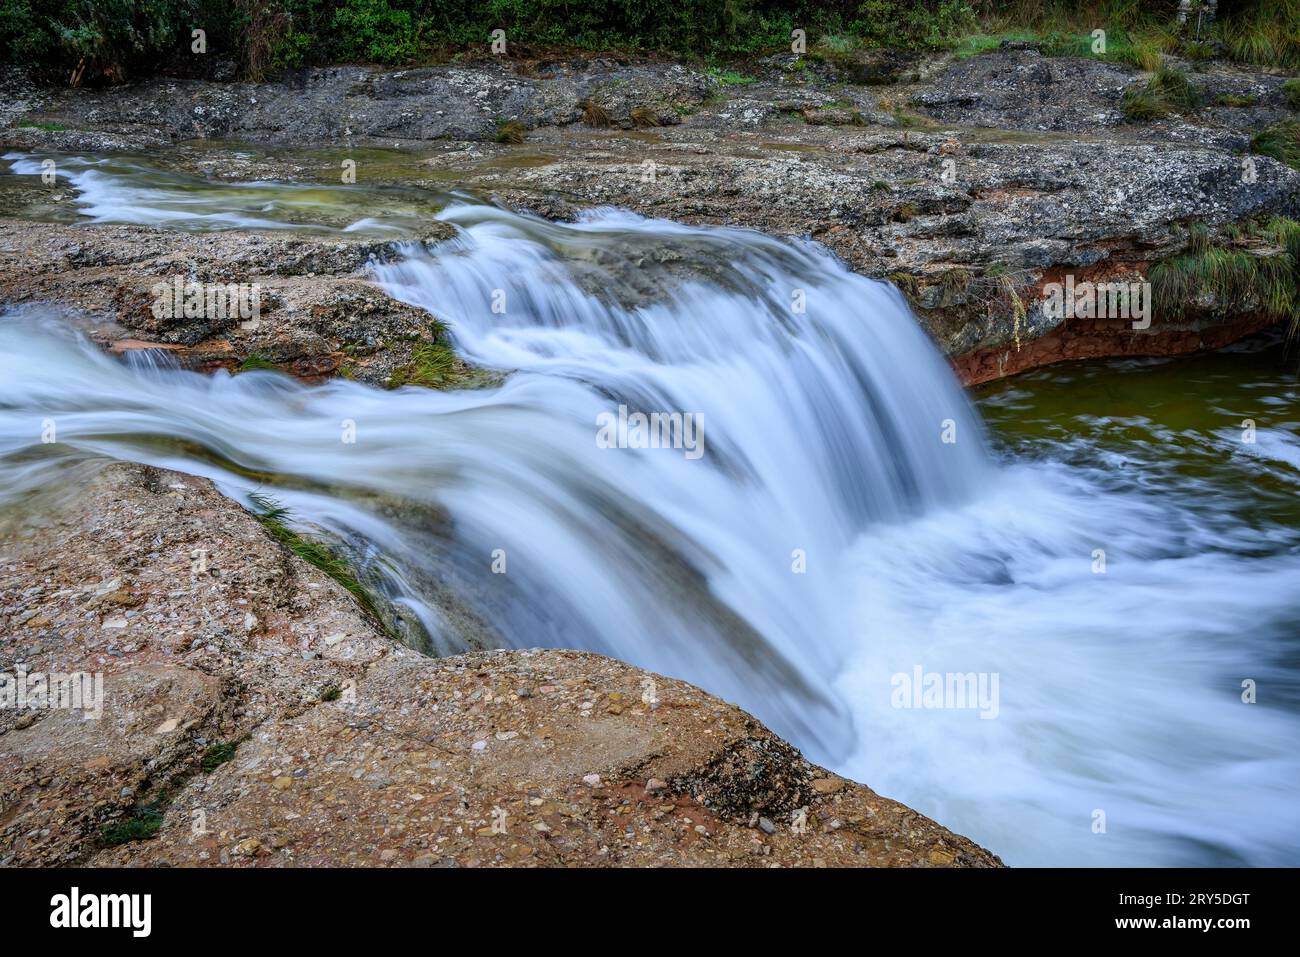 Toll del Vidre waterfall in the Algars river, in the Els Ports / Los Puertos natural park, with a large flow after heavy rains (Tarragona, Spain) Stock Photo